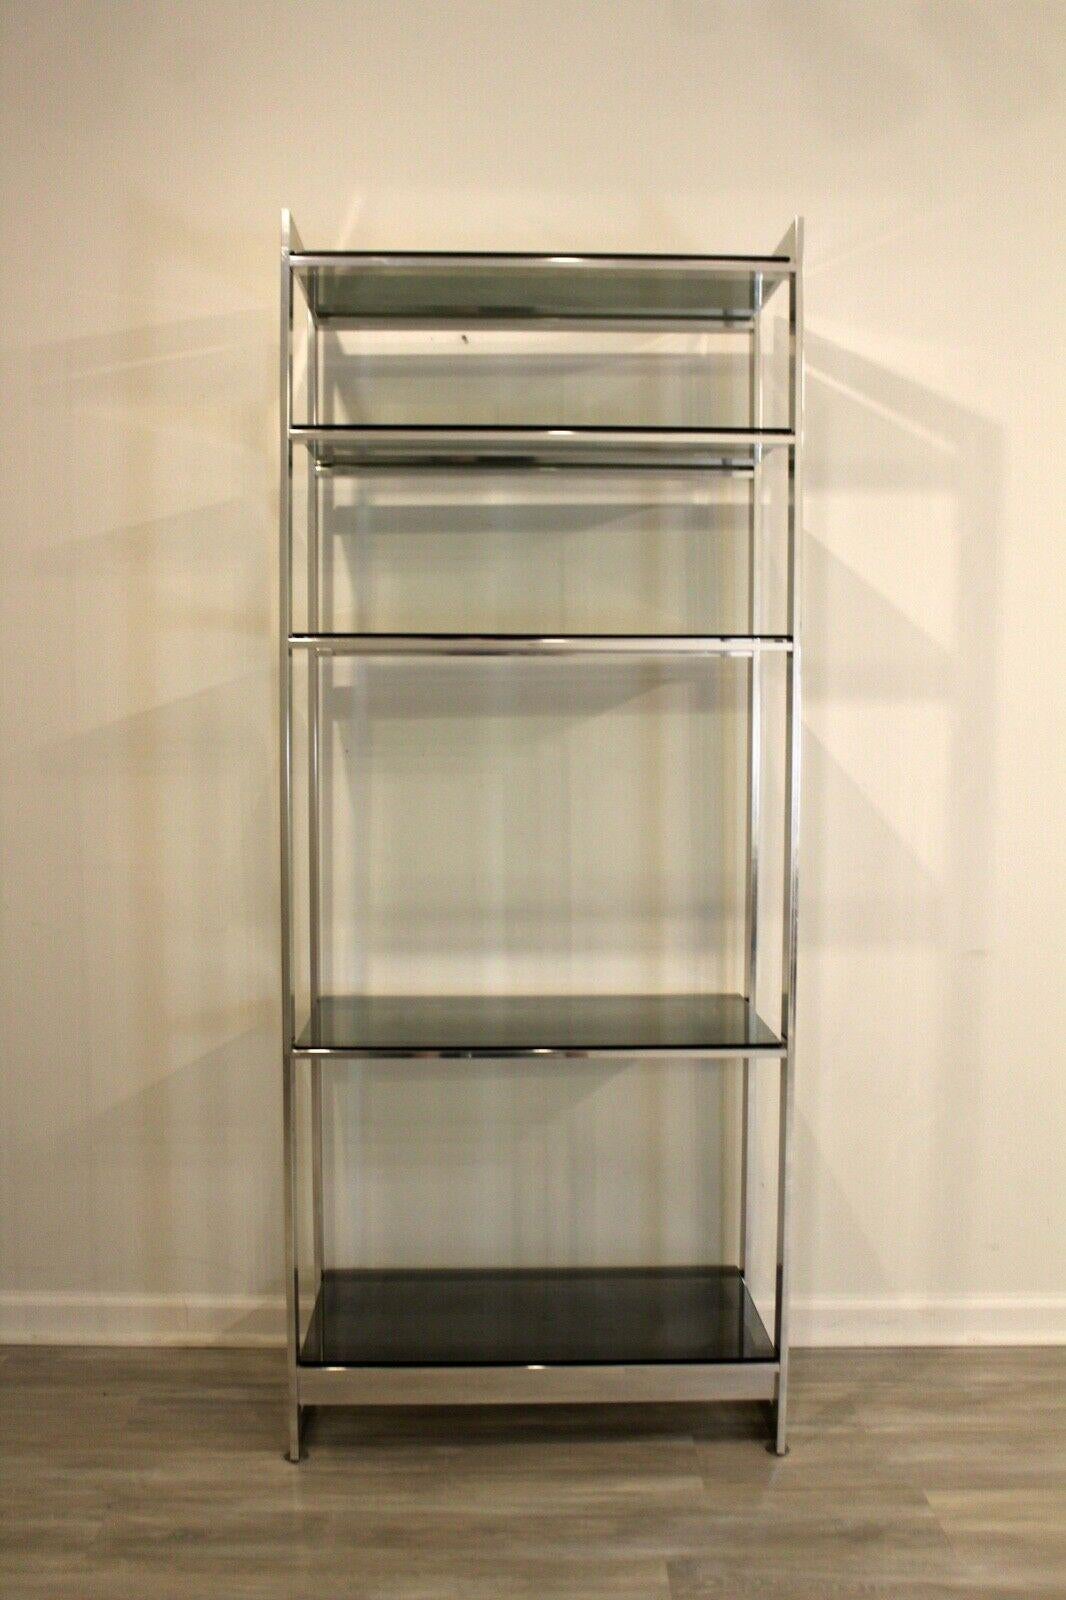 From Le Shoppe Too in Michigan comes this Mid-Century Modern with five shelves in smoked grey glass. Polished chrome framing brings this unit together in a functional, yet beautiful storage piece. In good condition.

Dimensions: 30.5 W x 16.5 D x